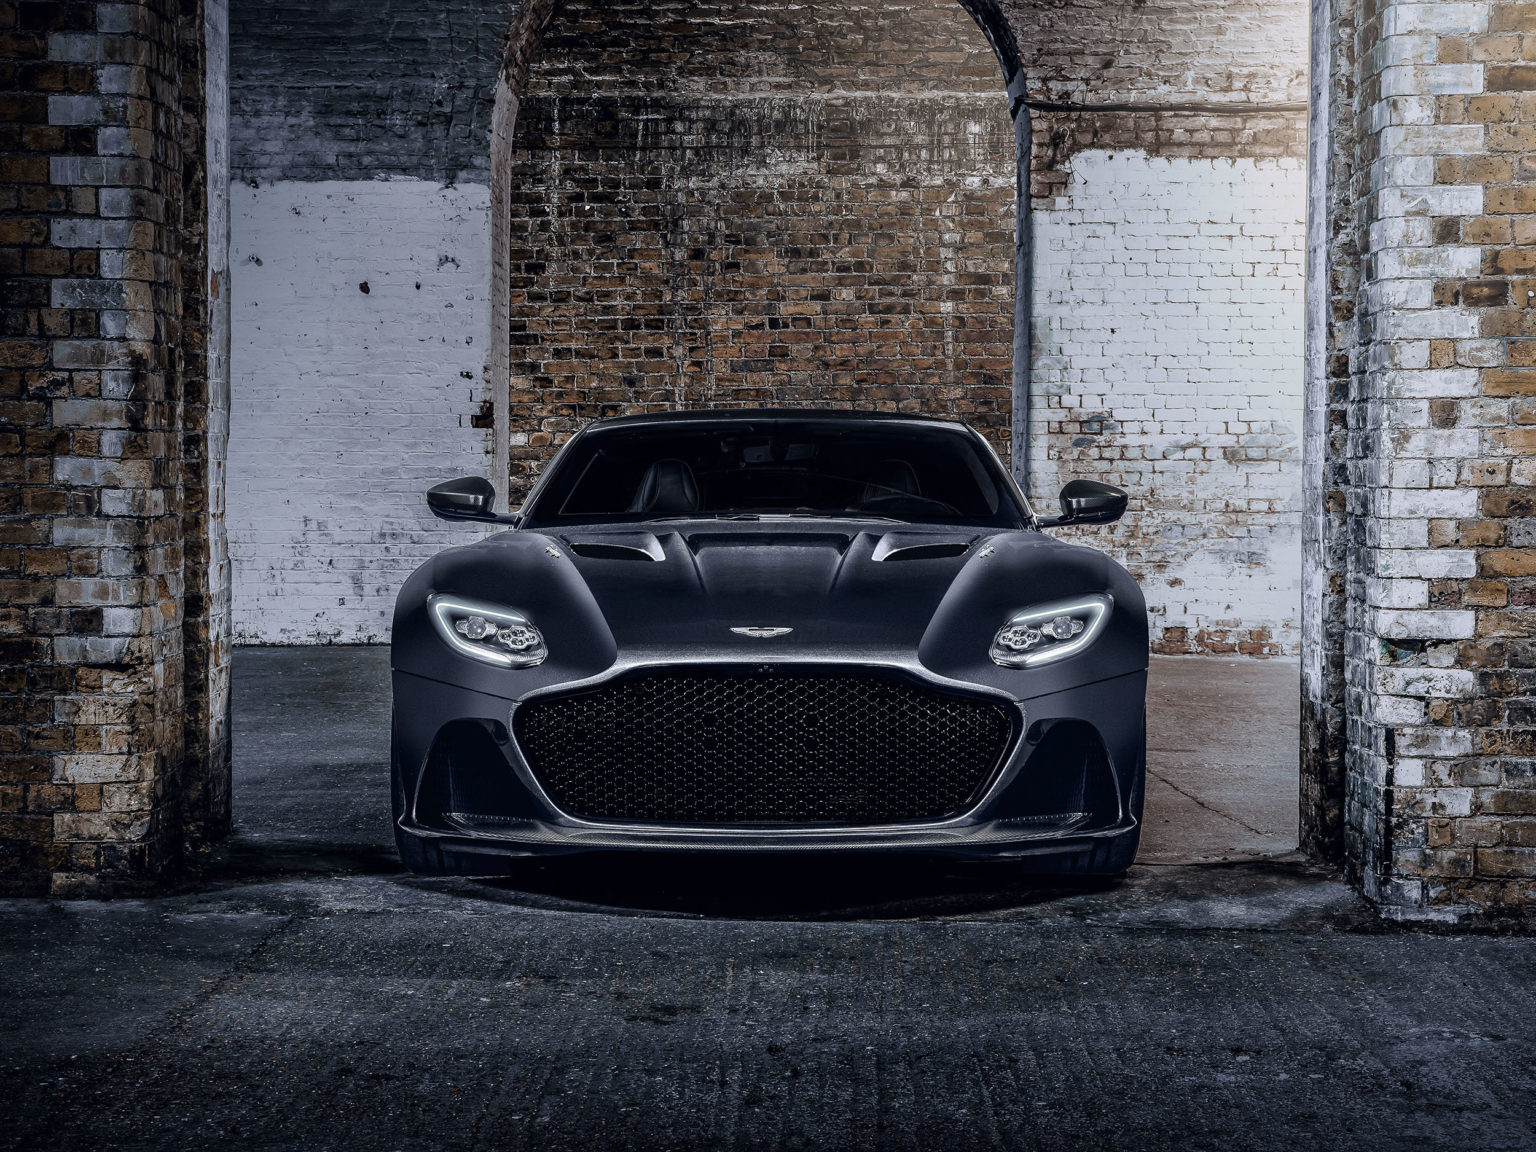 The Aston Martin DBS Superleggera 007 Edition is just one of the new models the company rolled out this year.